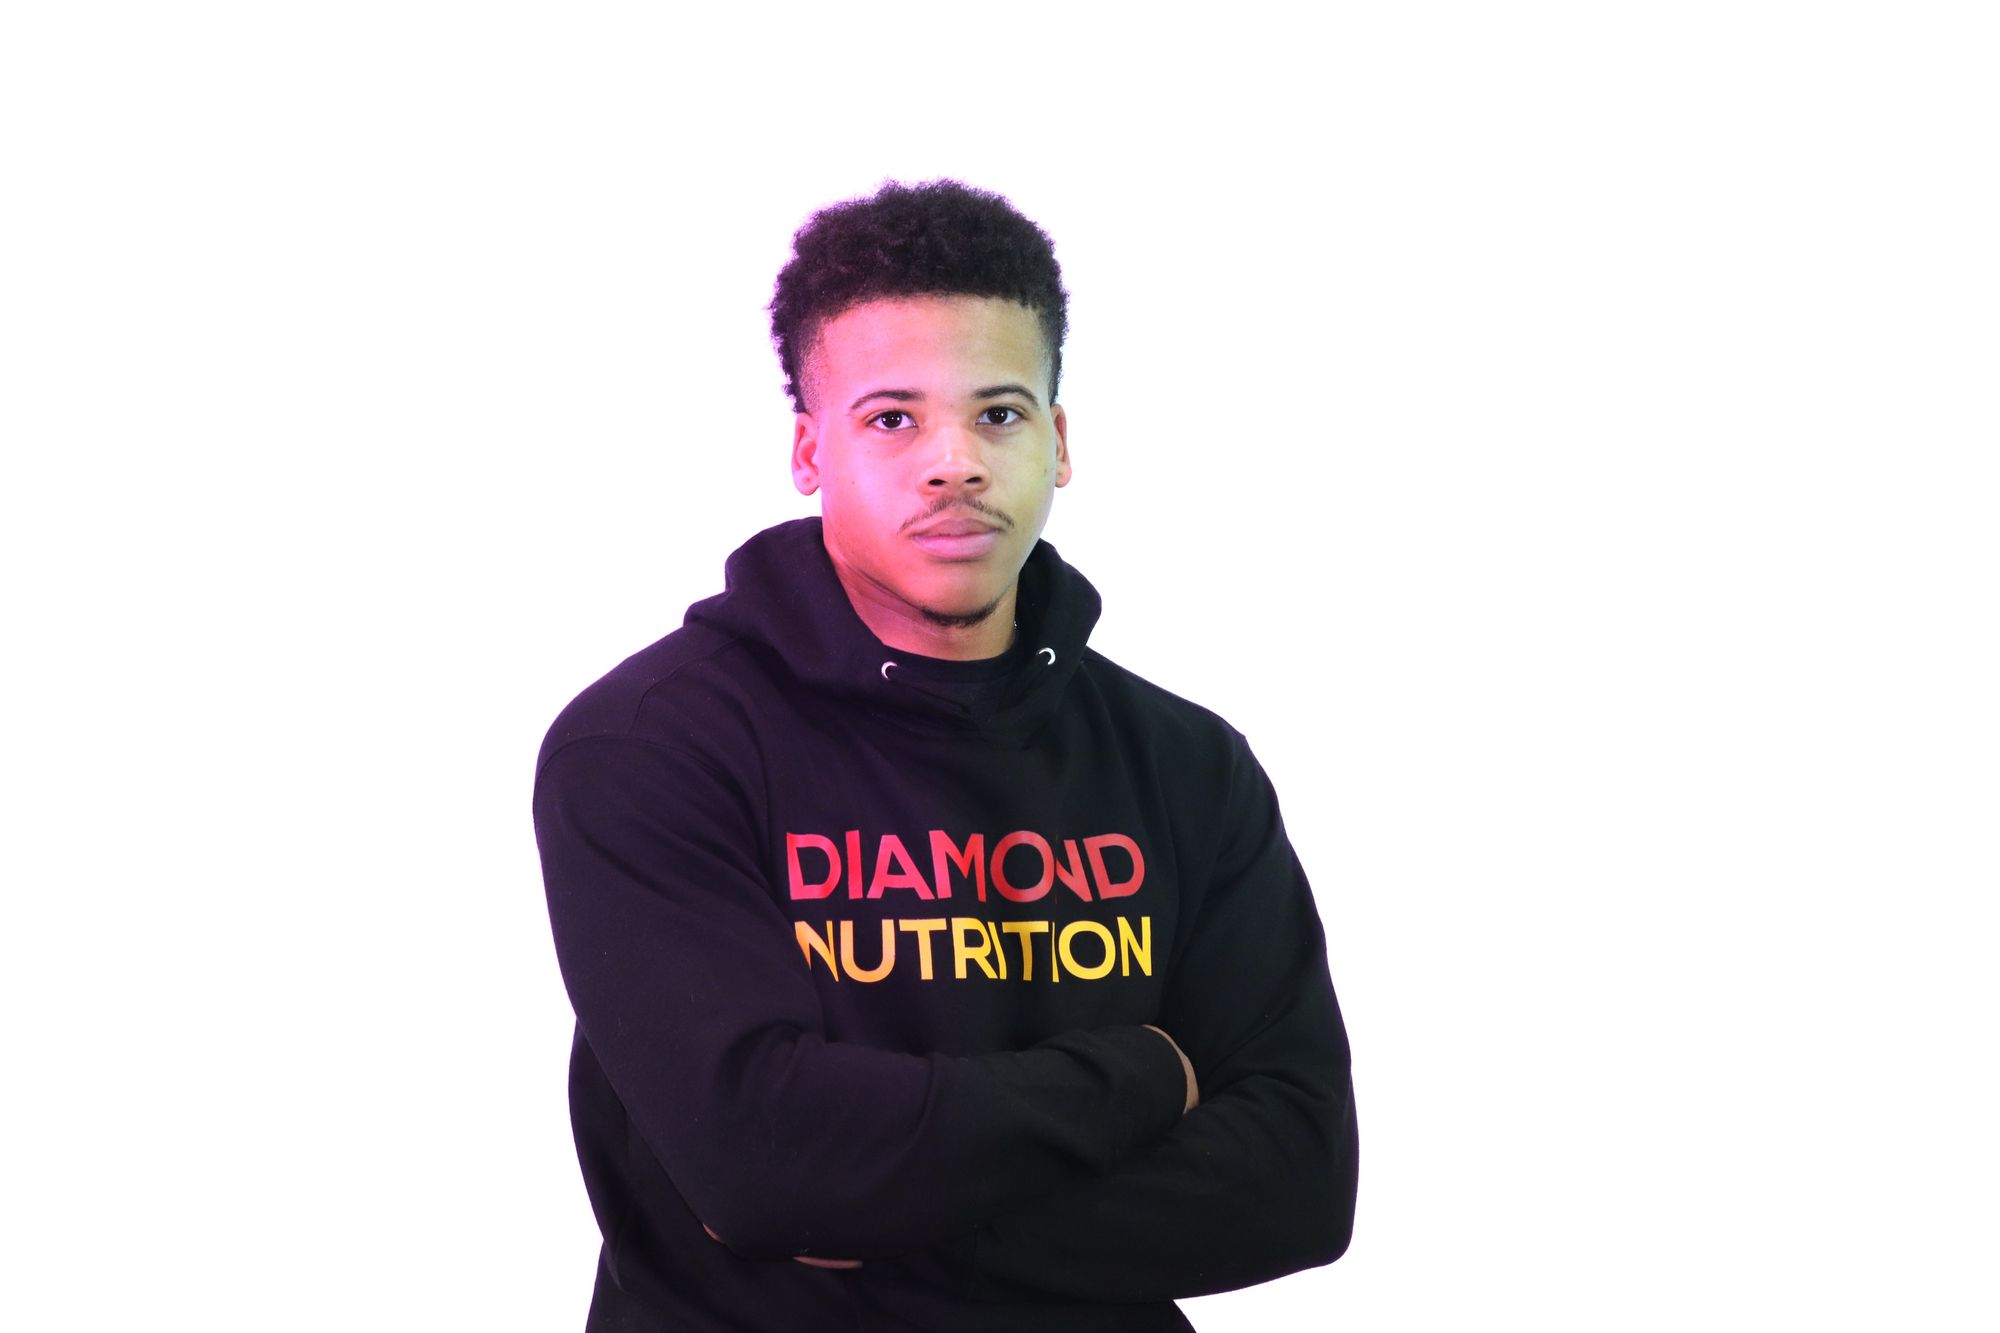 High-Quality Supplements, Science-backed - Diamond Nutrition